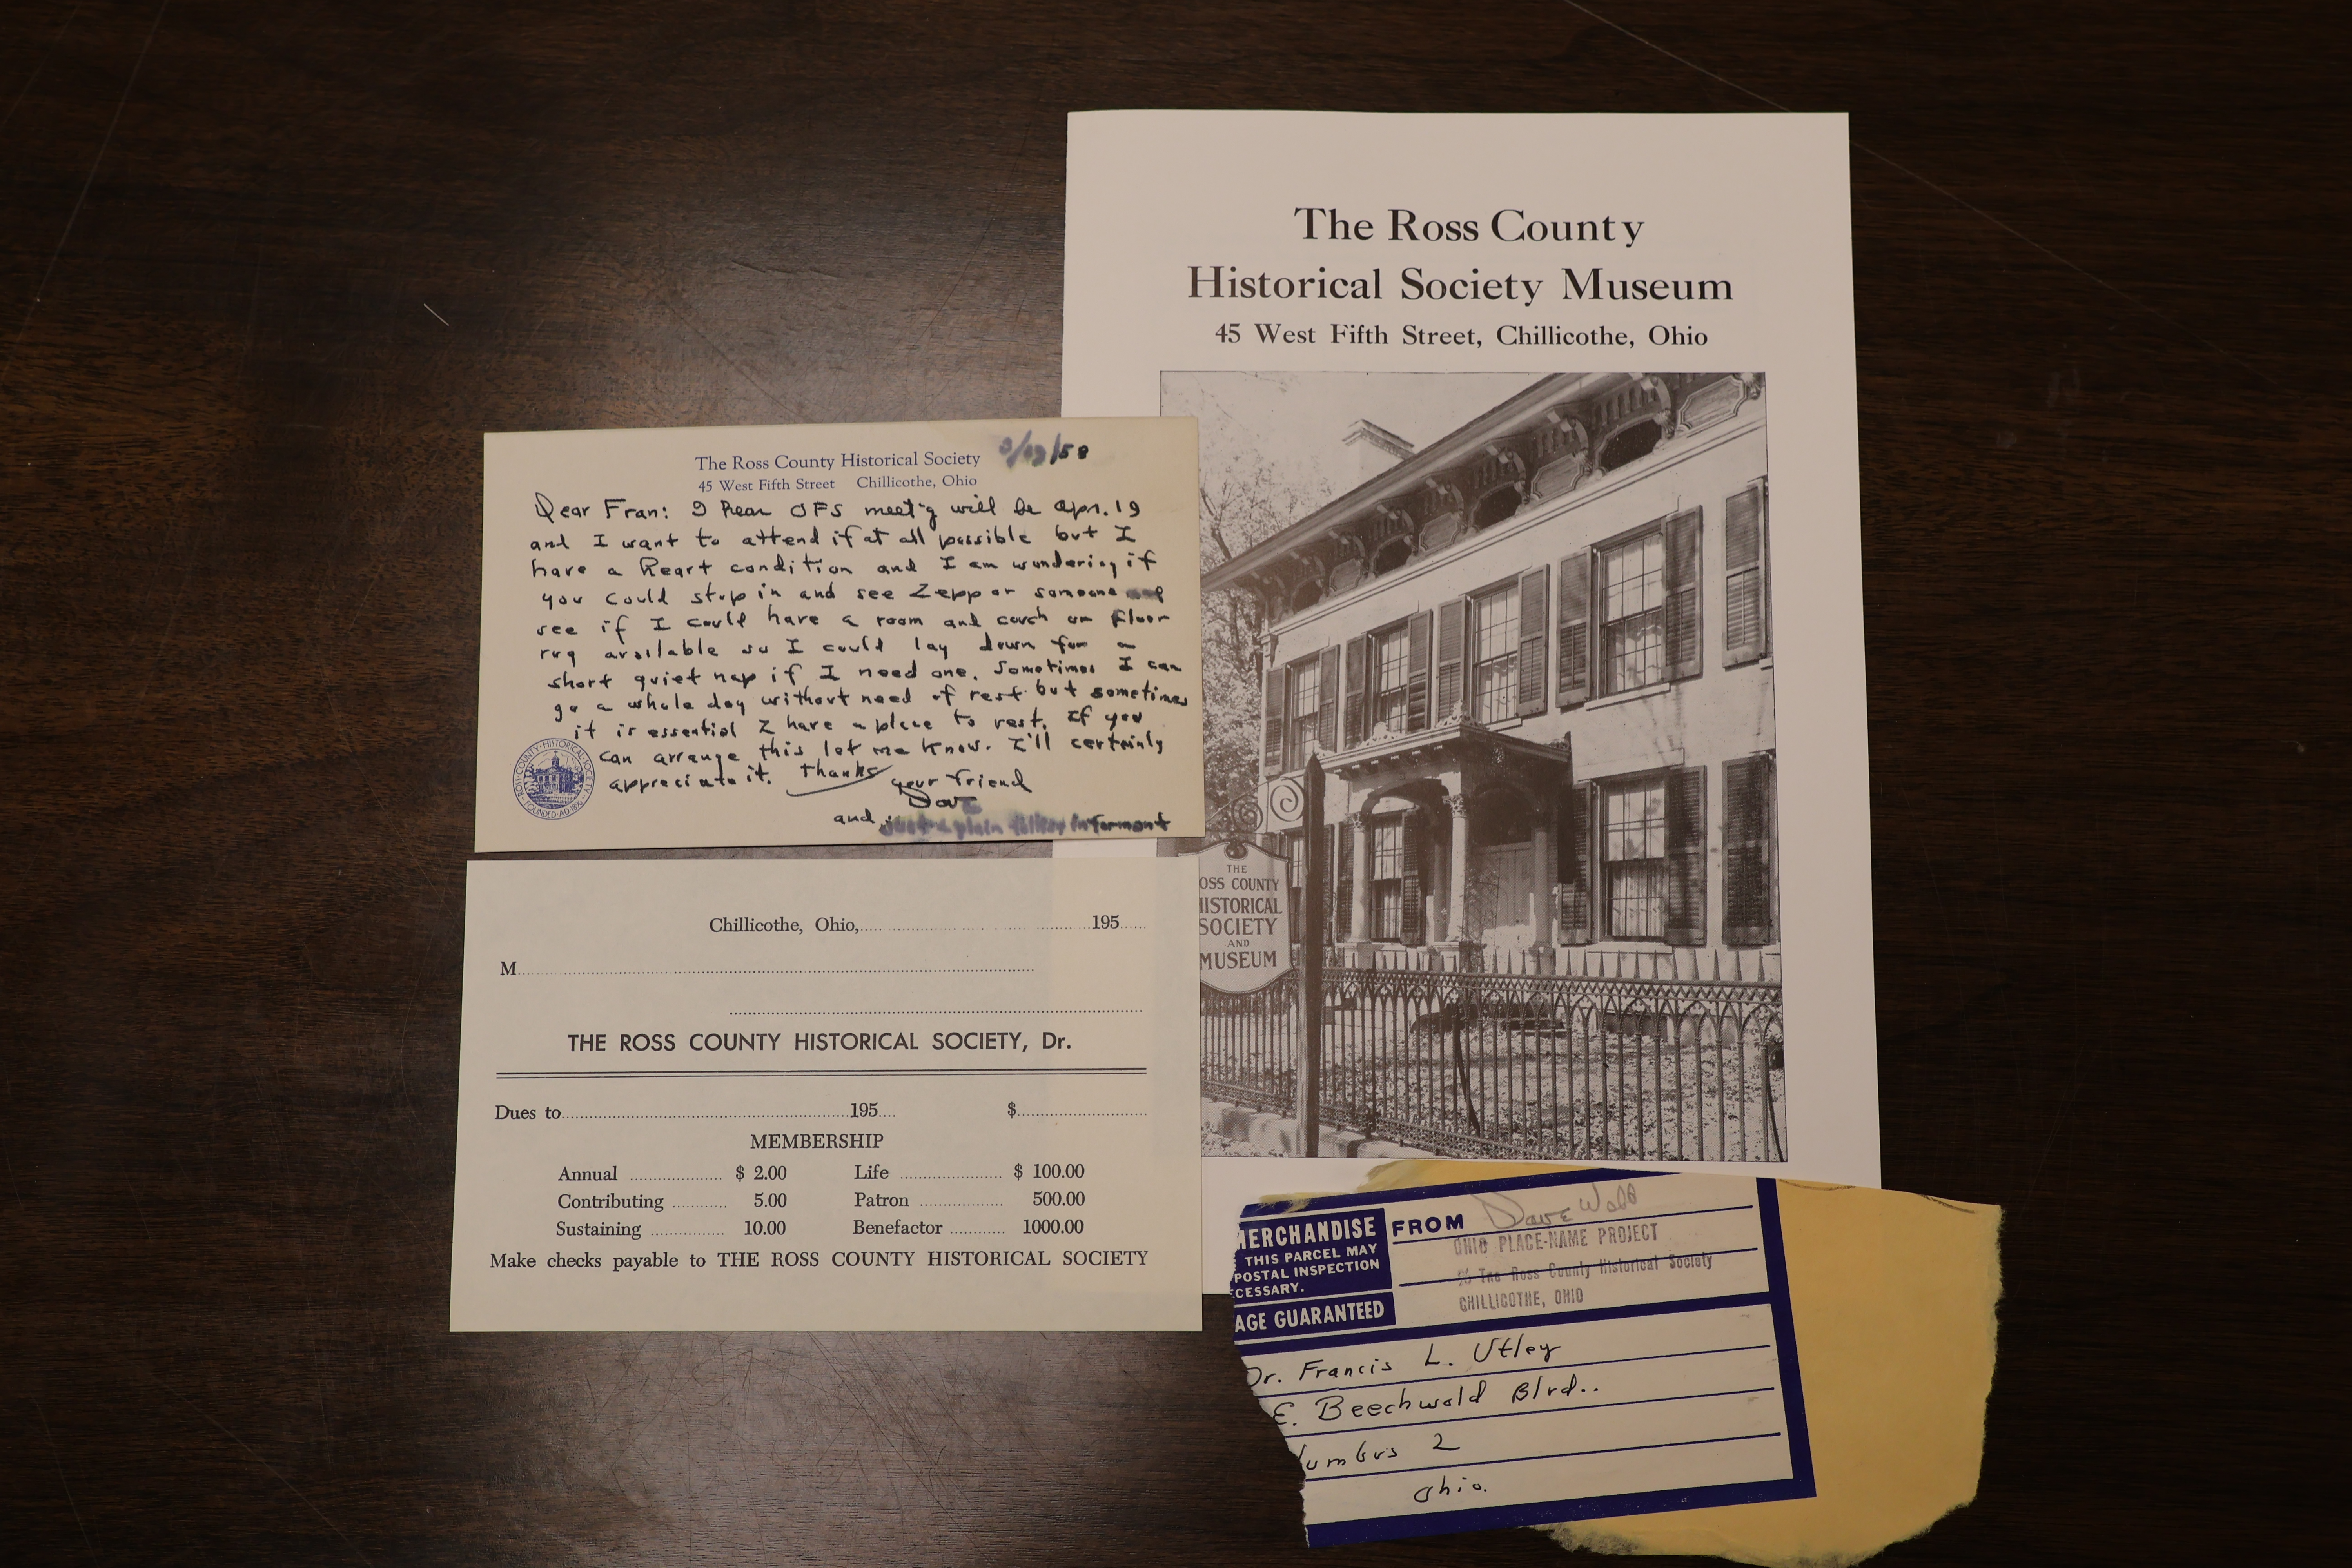 Displayed are four items from the collection. The first is a brochure on the Ross County Historical Society. The second is a ripped portion of a postal address for correspondence between Dave Webb and Fran Utley. The third is a membership card for the Ross County Historical Society. The fourth is a note from Dave to Fran about an accessibility request.